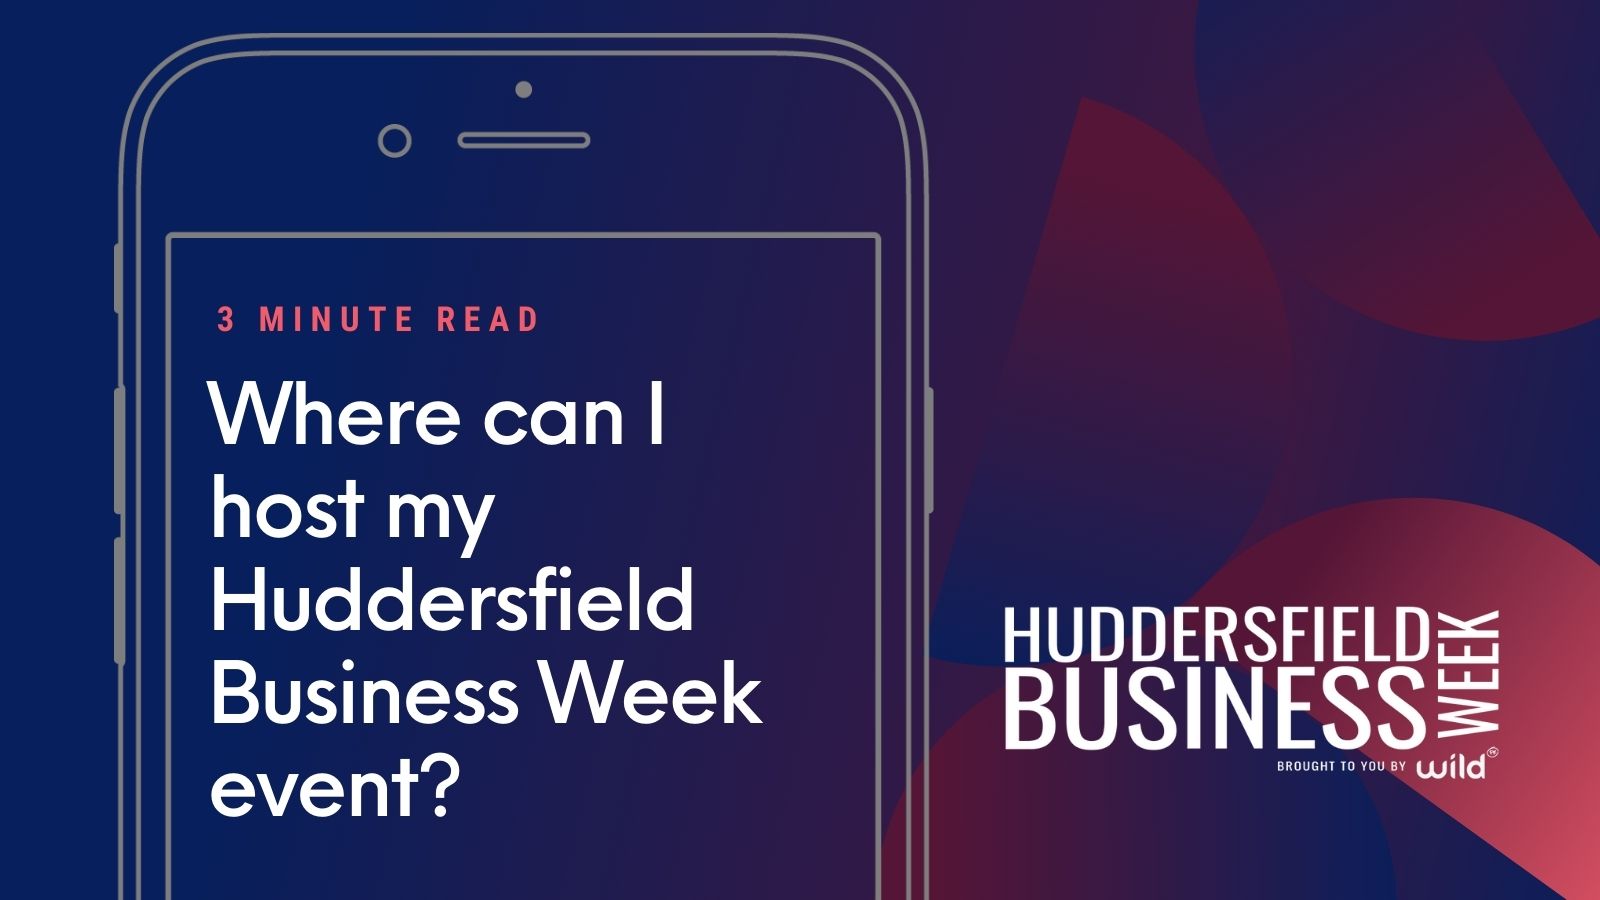 Where can I host my Huddersfield Business Week event?